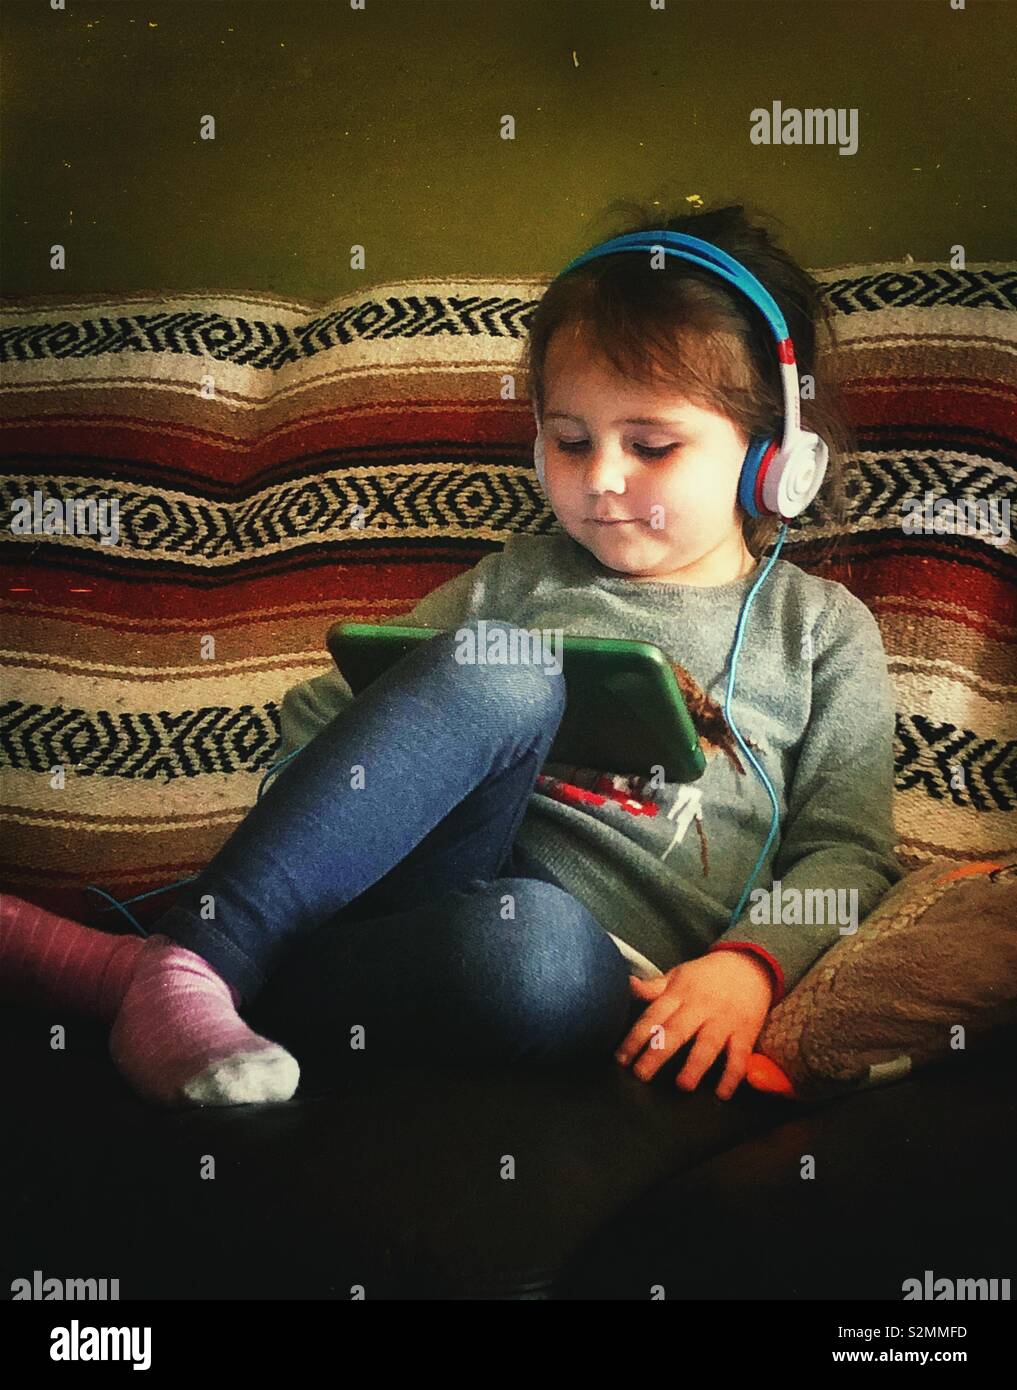 3 year old girl sitting on couch using tablet with headphones Stock Photo